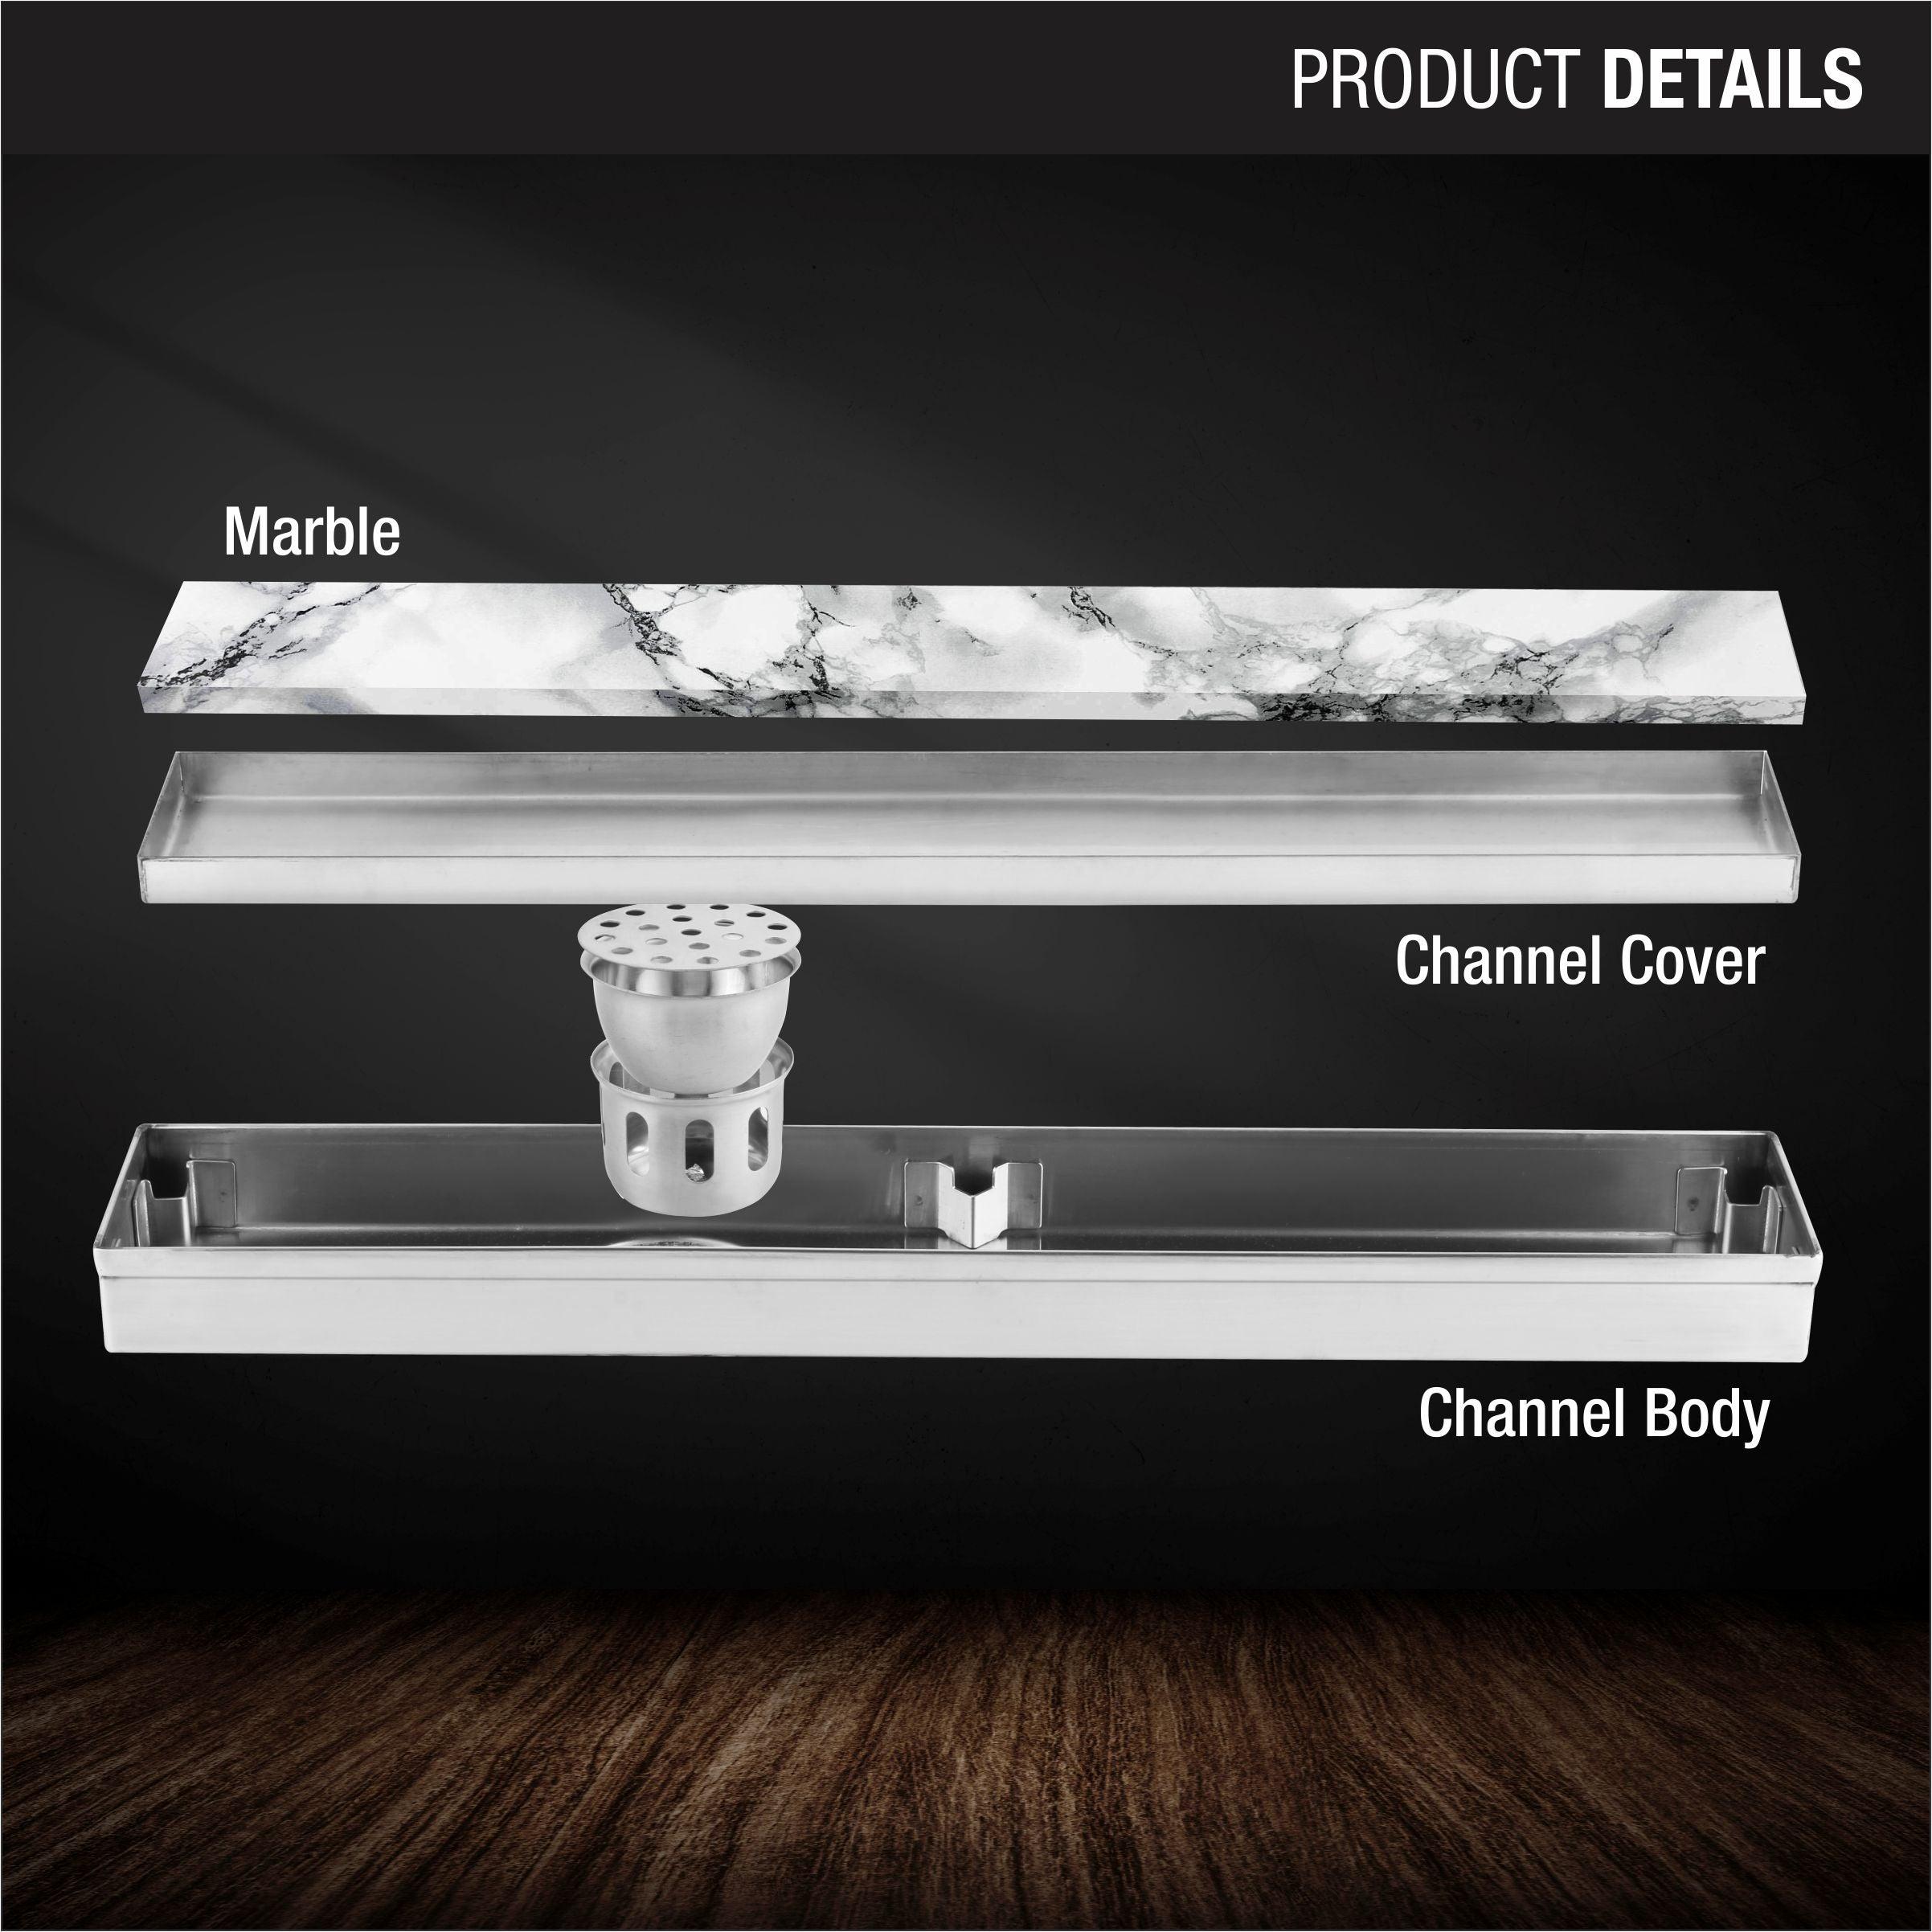 Marble Insert Shower Drain Channel (32 x 5 Inches) product details